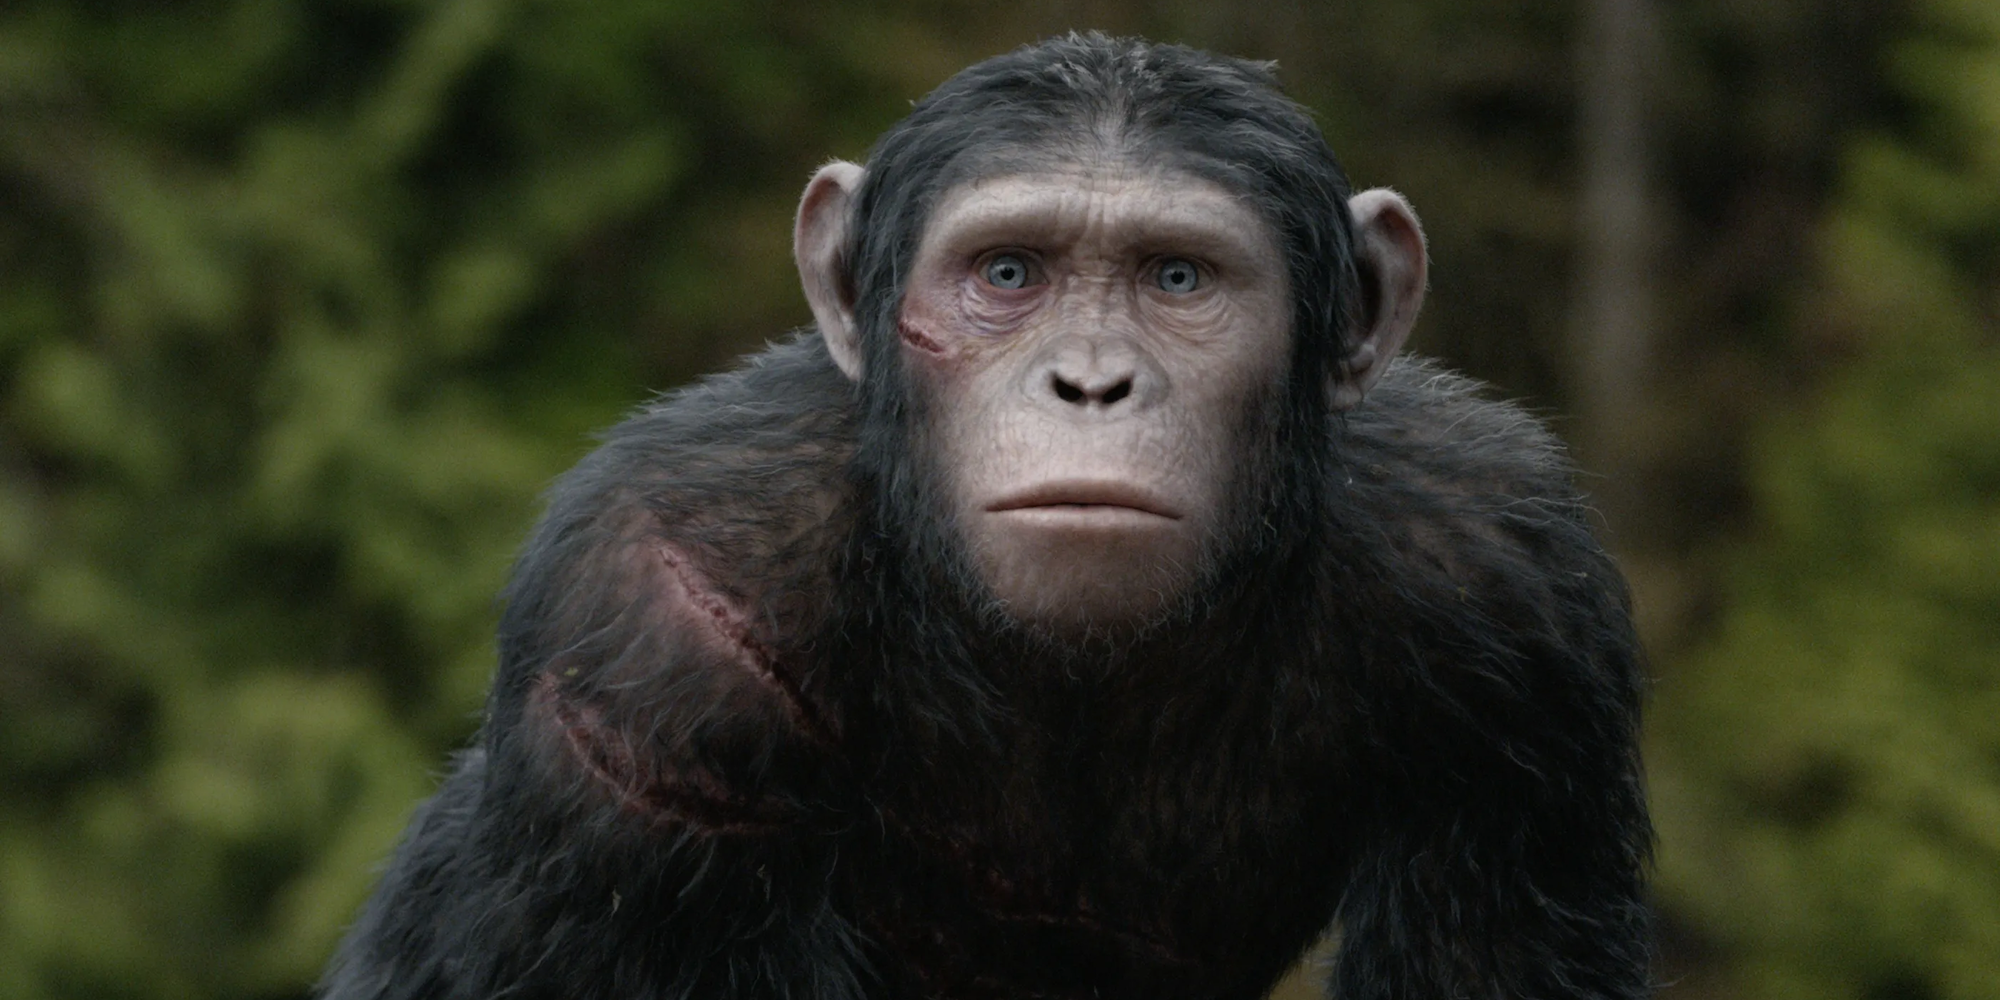 blue eyes in planet of the apes